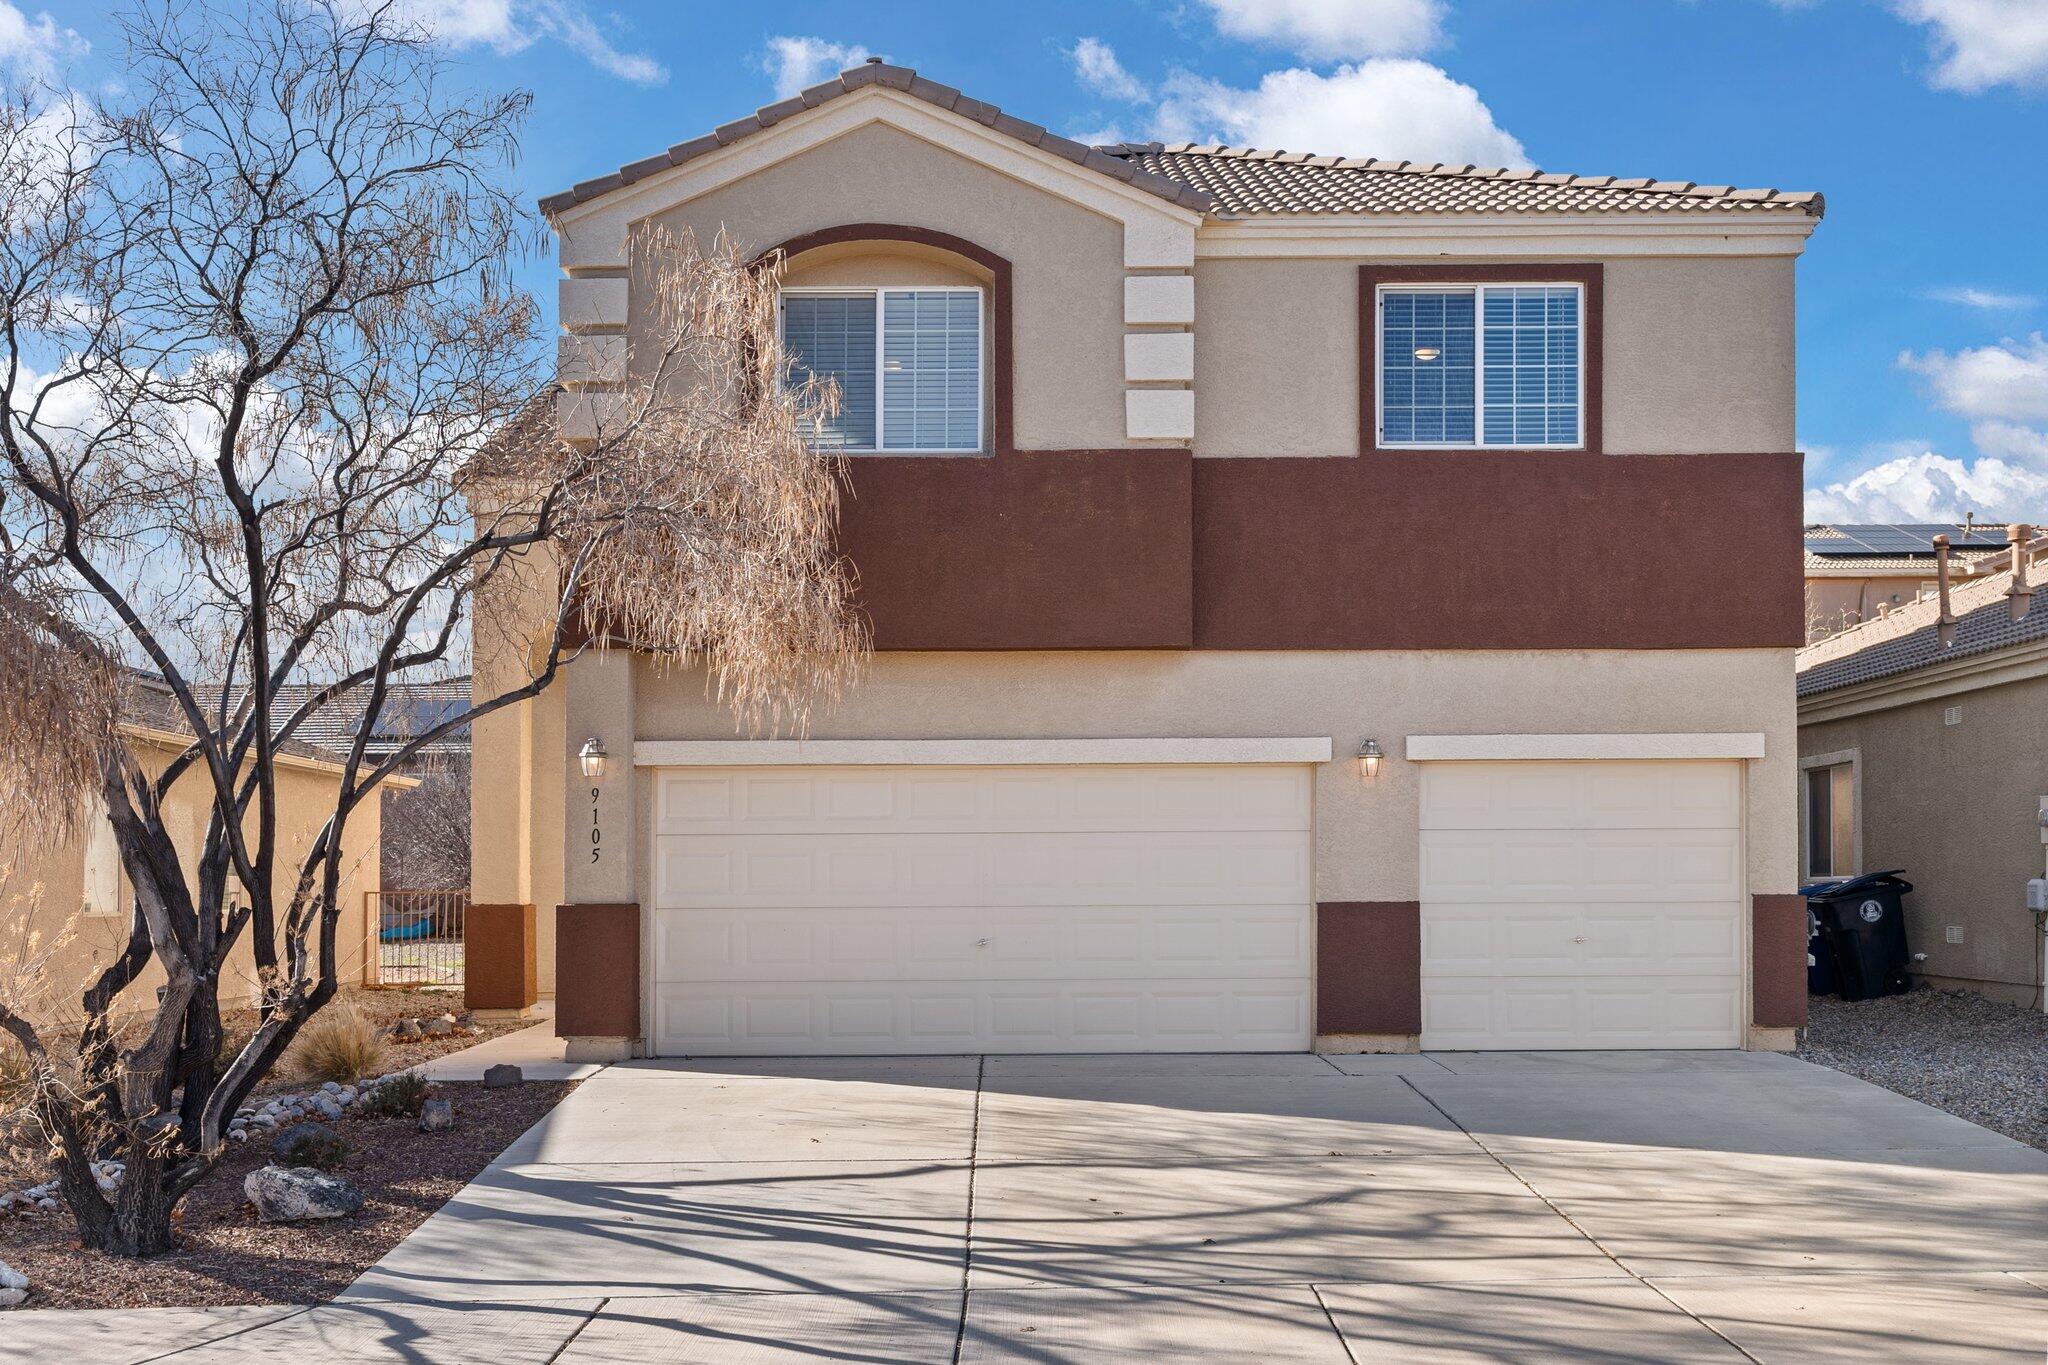 Located in a very desirable area, Sierra at the Trails, this 5BR/4Ba 2923-Sfhome with 3-Car Epoxied floor has Huge Bedrooms, walk-in Closets,fresh paint inside & out, updated Carpet & Fixtures, Balcony off Master BRwith Gas/Log Fireplace in a room big enough for 4 King sized beds. Alloutlets and light switches replaced, Top feature in this home is it has not1 but 3 Master Suites, (BRs with a private bath directly from the BRoffering more privacy) Additional amenities include Dual AC/Heating,Upgraded Maple Cabinets throughout, Kitchen Island with Granite tops,18'' Ceramic tile in all wet areas. Laundry, located upstairs with 4 of the5 BRs has 110V/220V/Gas Dryer connections & deep utility sink. Wiredfor Sec. Sys, Front Bubbler Xeriscaping.